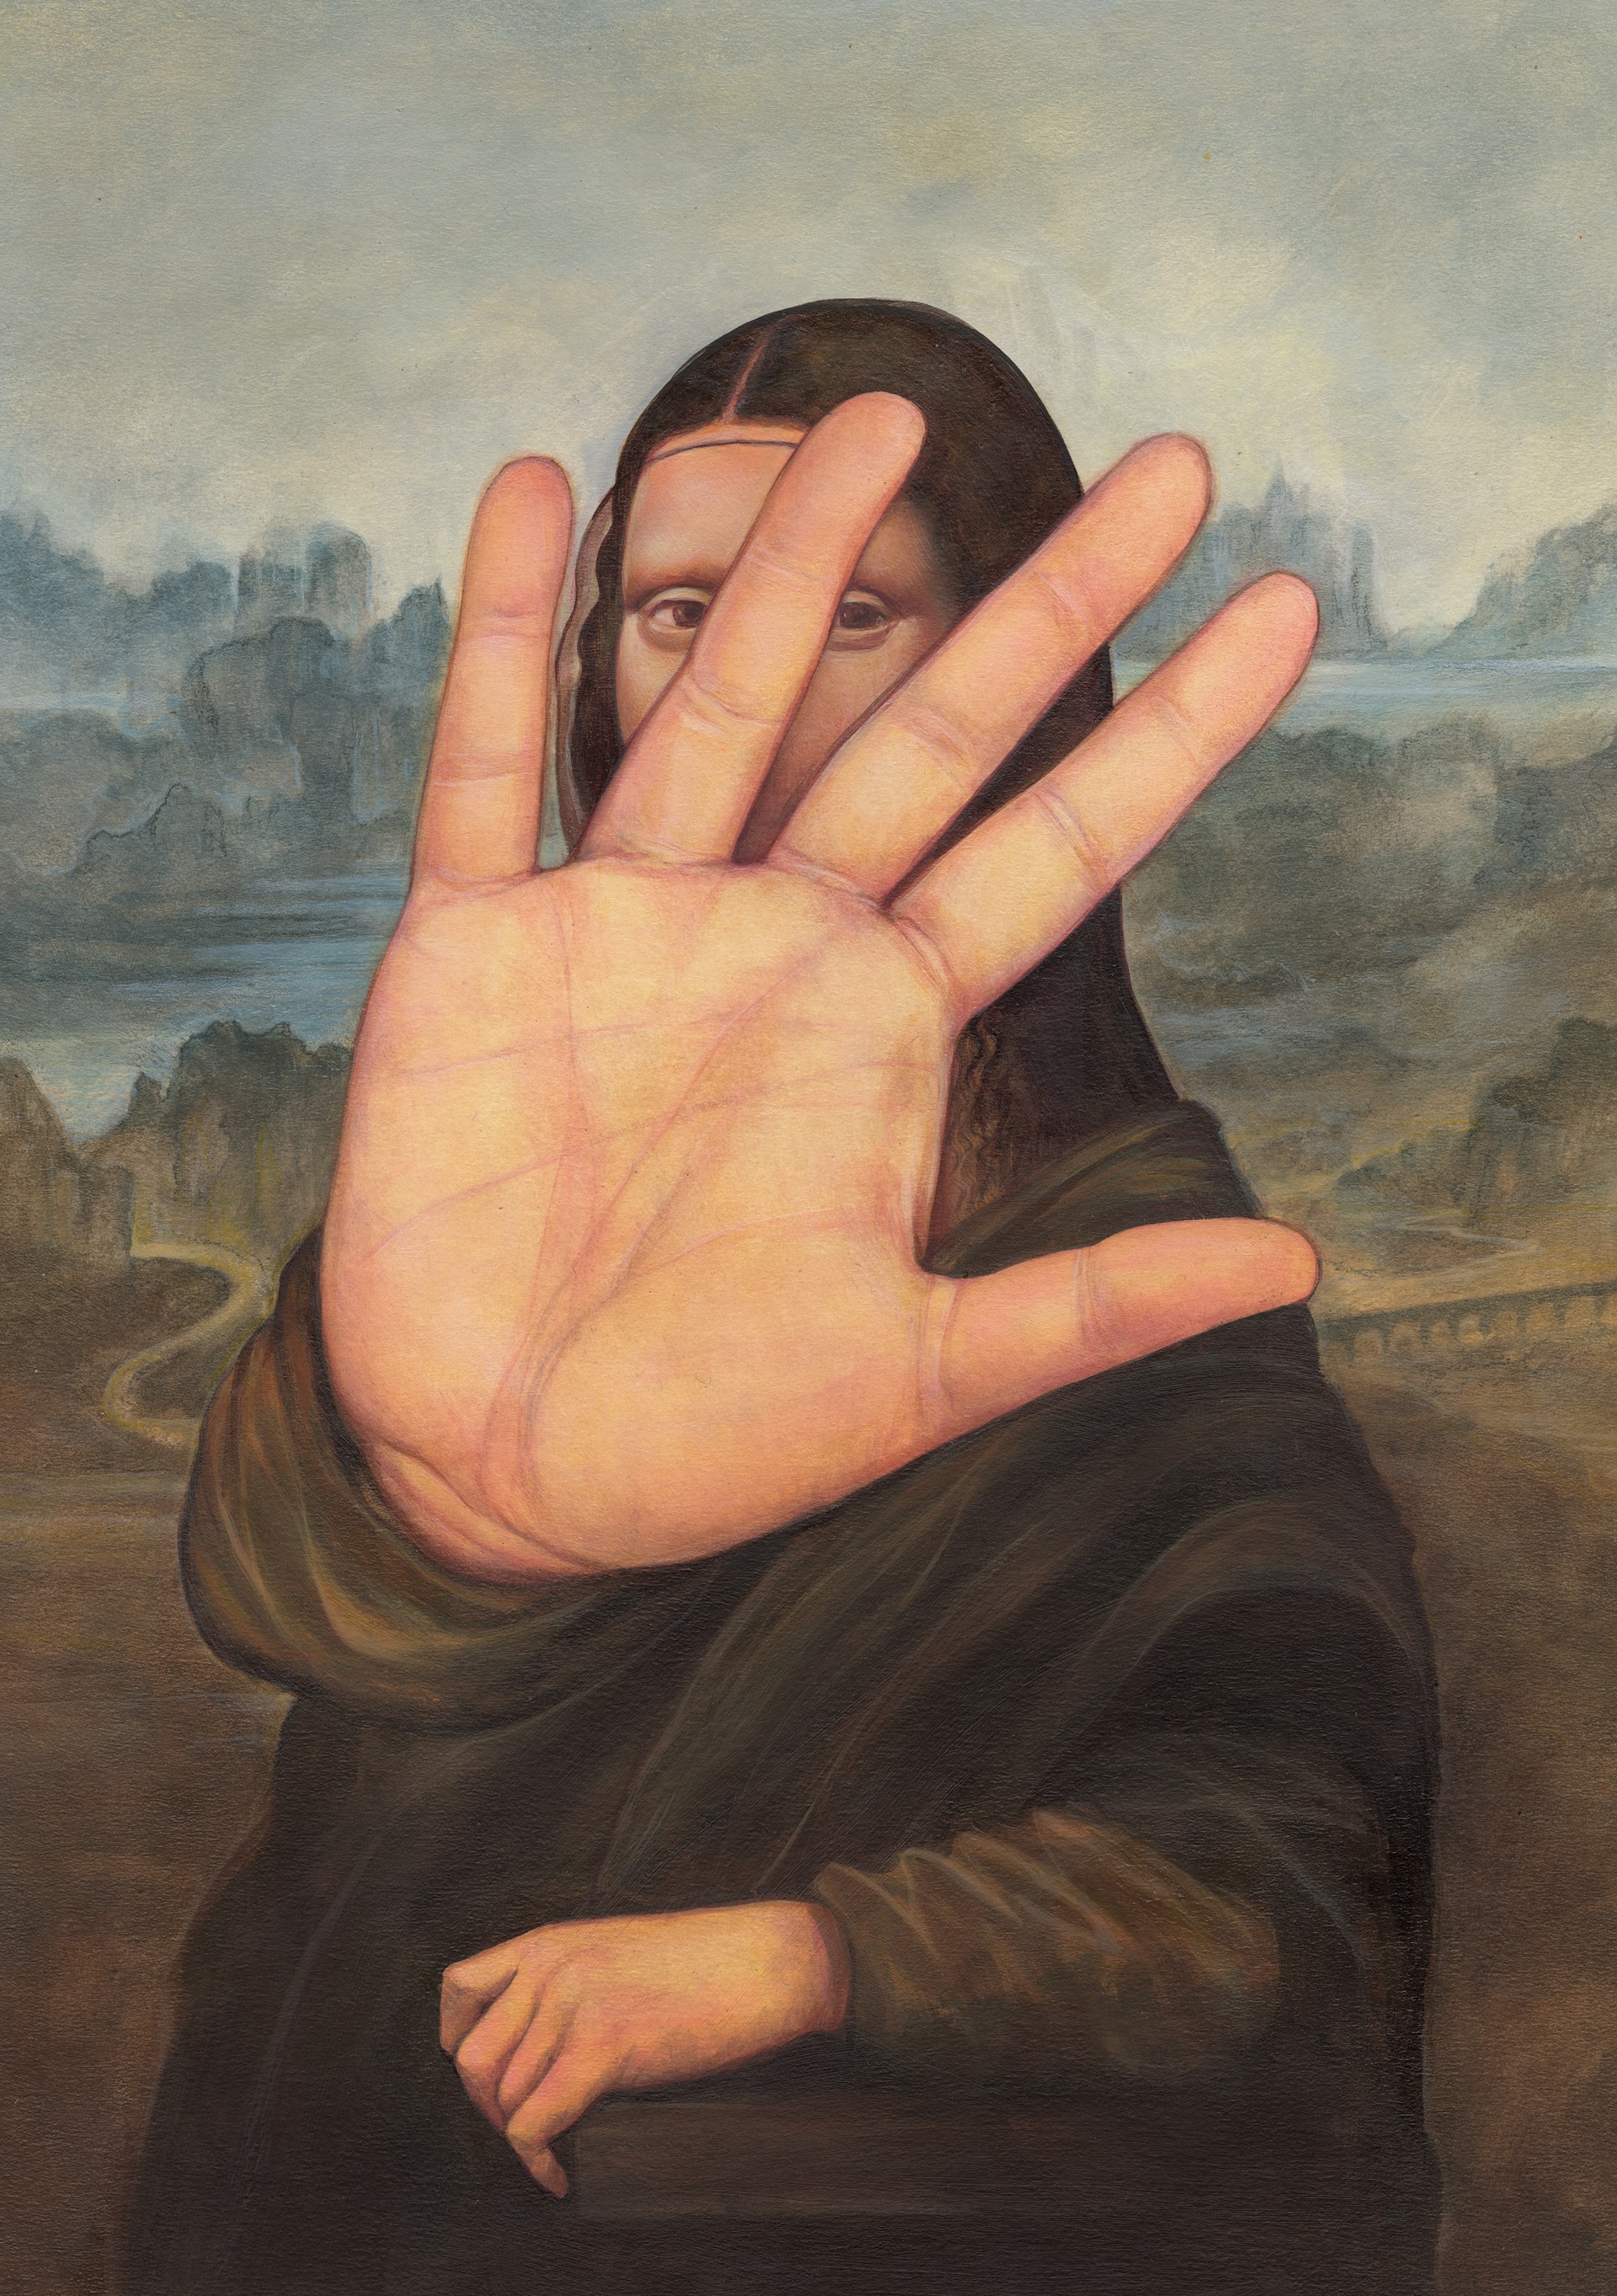 Cover for The New Yorker Magazine: No Photos, Please! by Anita Kunz